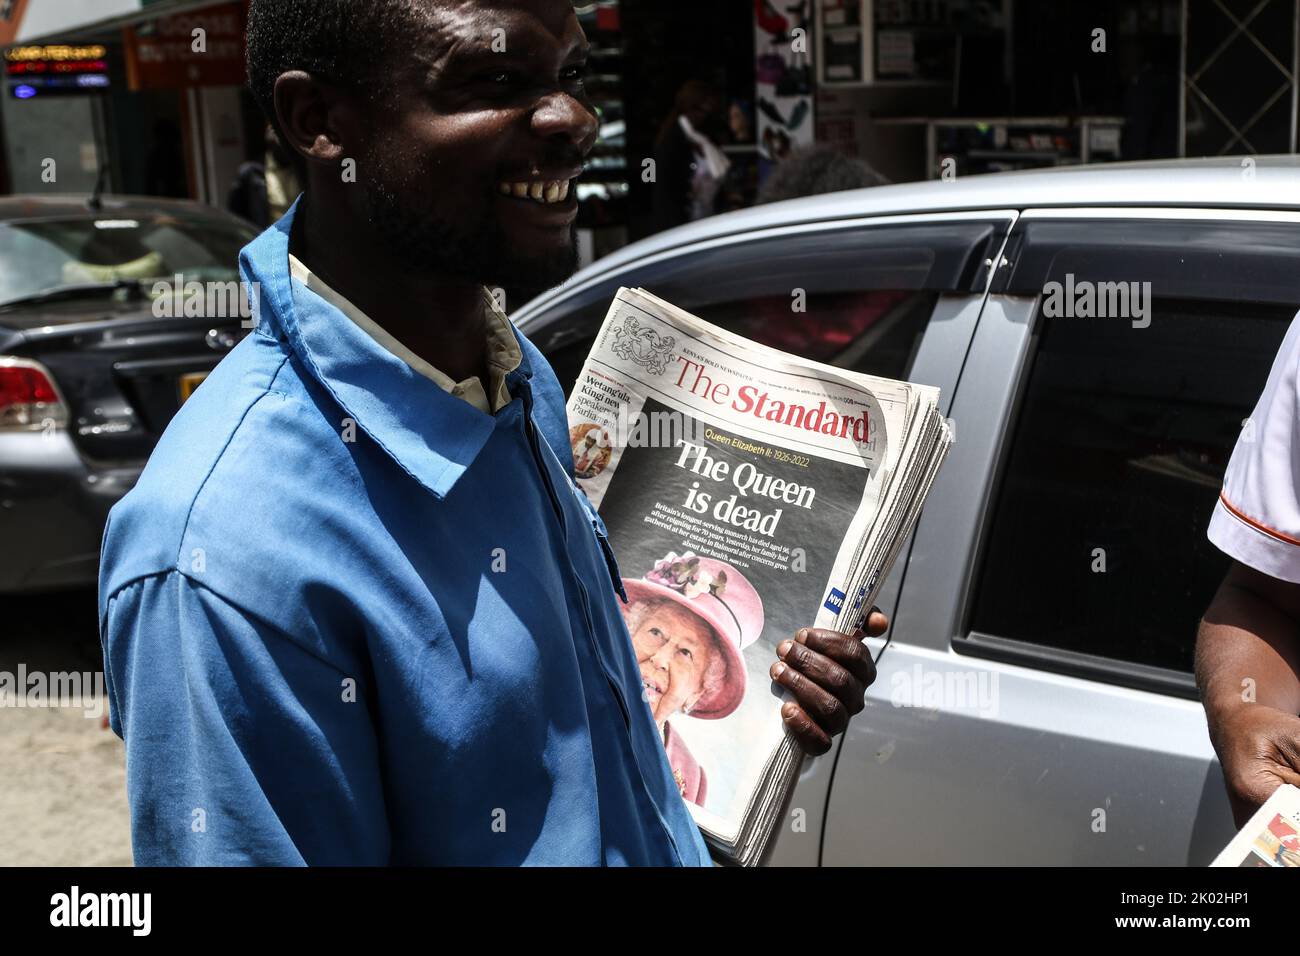 A newspaper vendor is seen smiling while holding newspapers with a front page image of Queen Elizabeth II. Queen Elizabeth II died on Thursday, September 8, 2022, at the age of 96. Stock Photo